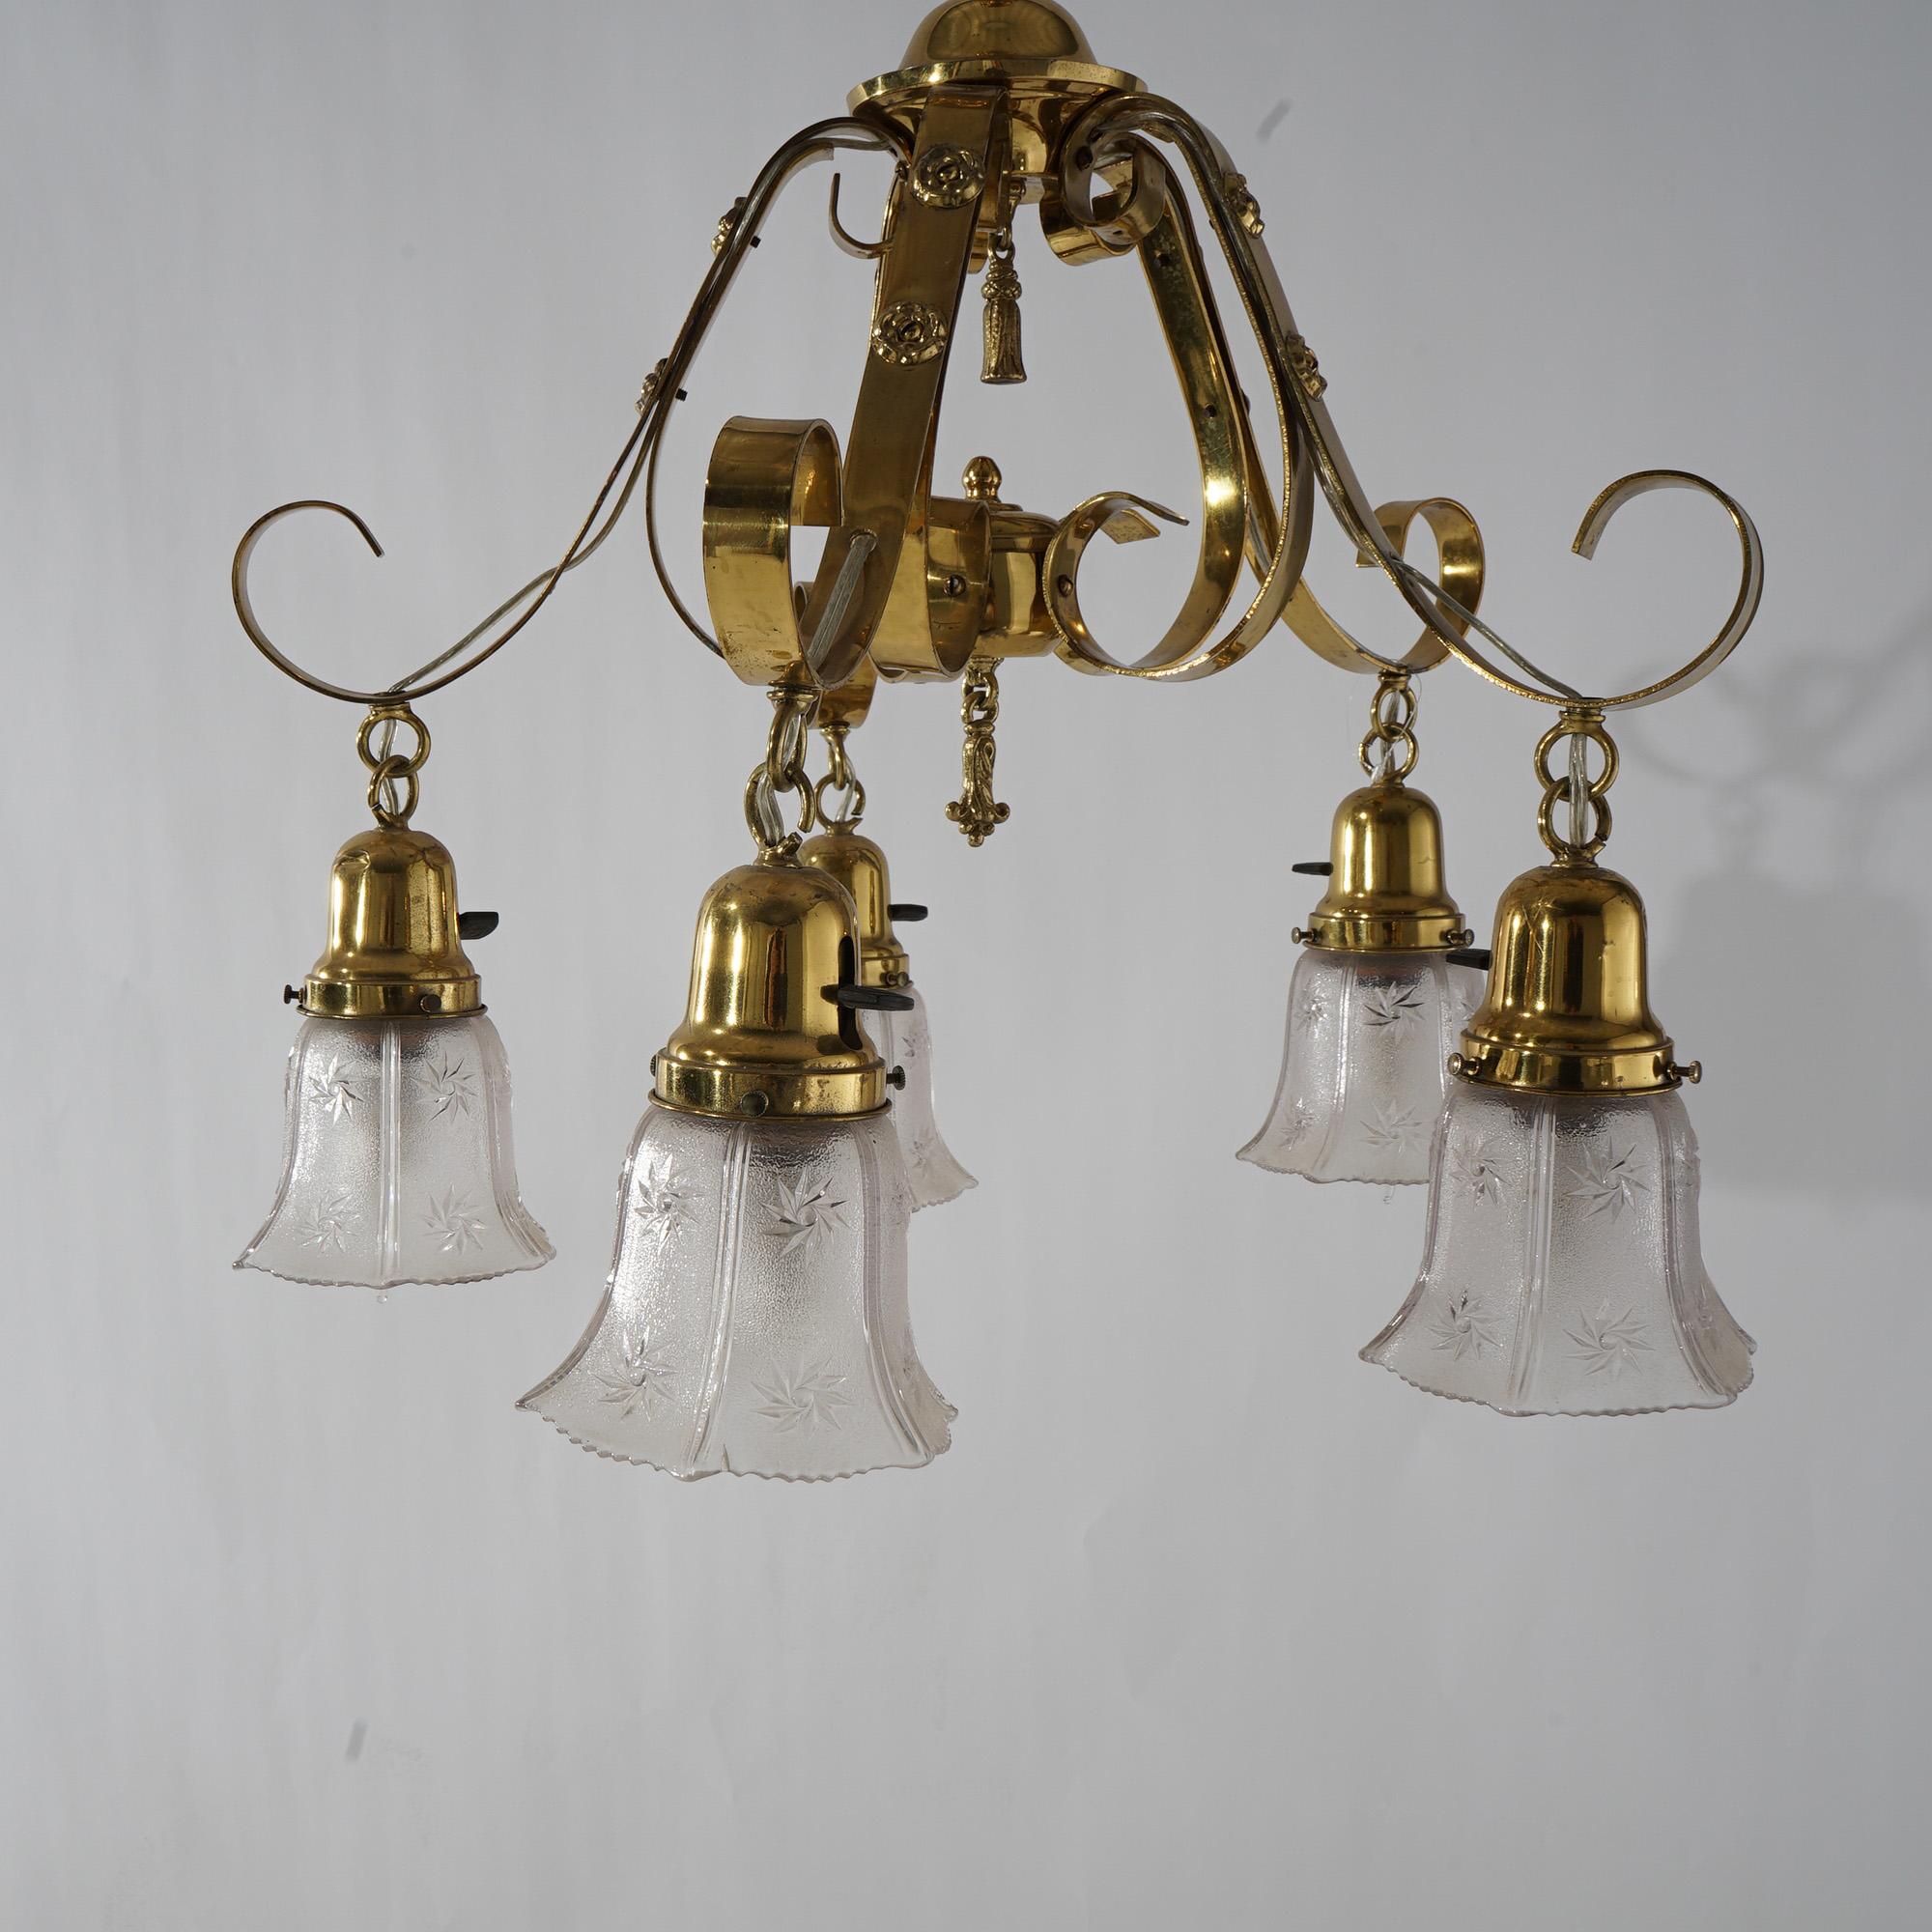 Antique Arts & Crafts Gilt Metal & Brass Hanging Fixture, Embossed Shades c1920 For Sale 2